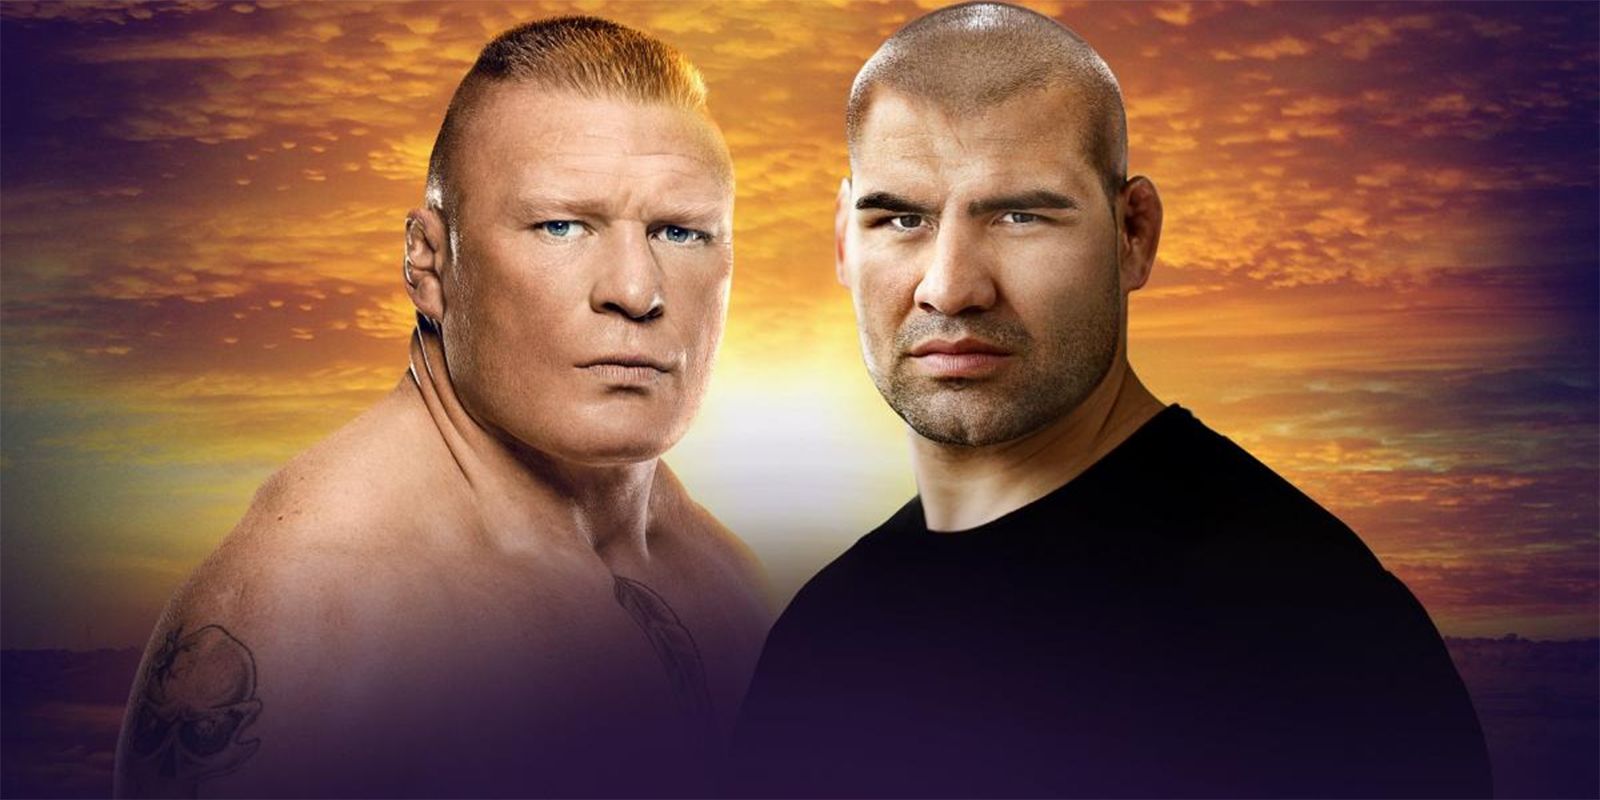 Wwe Crown Jewel Brock Lesnar Taps Out Cain Velasquez In 2 Minutes